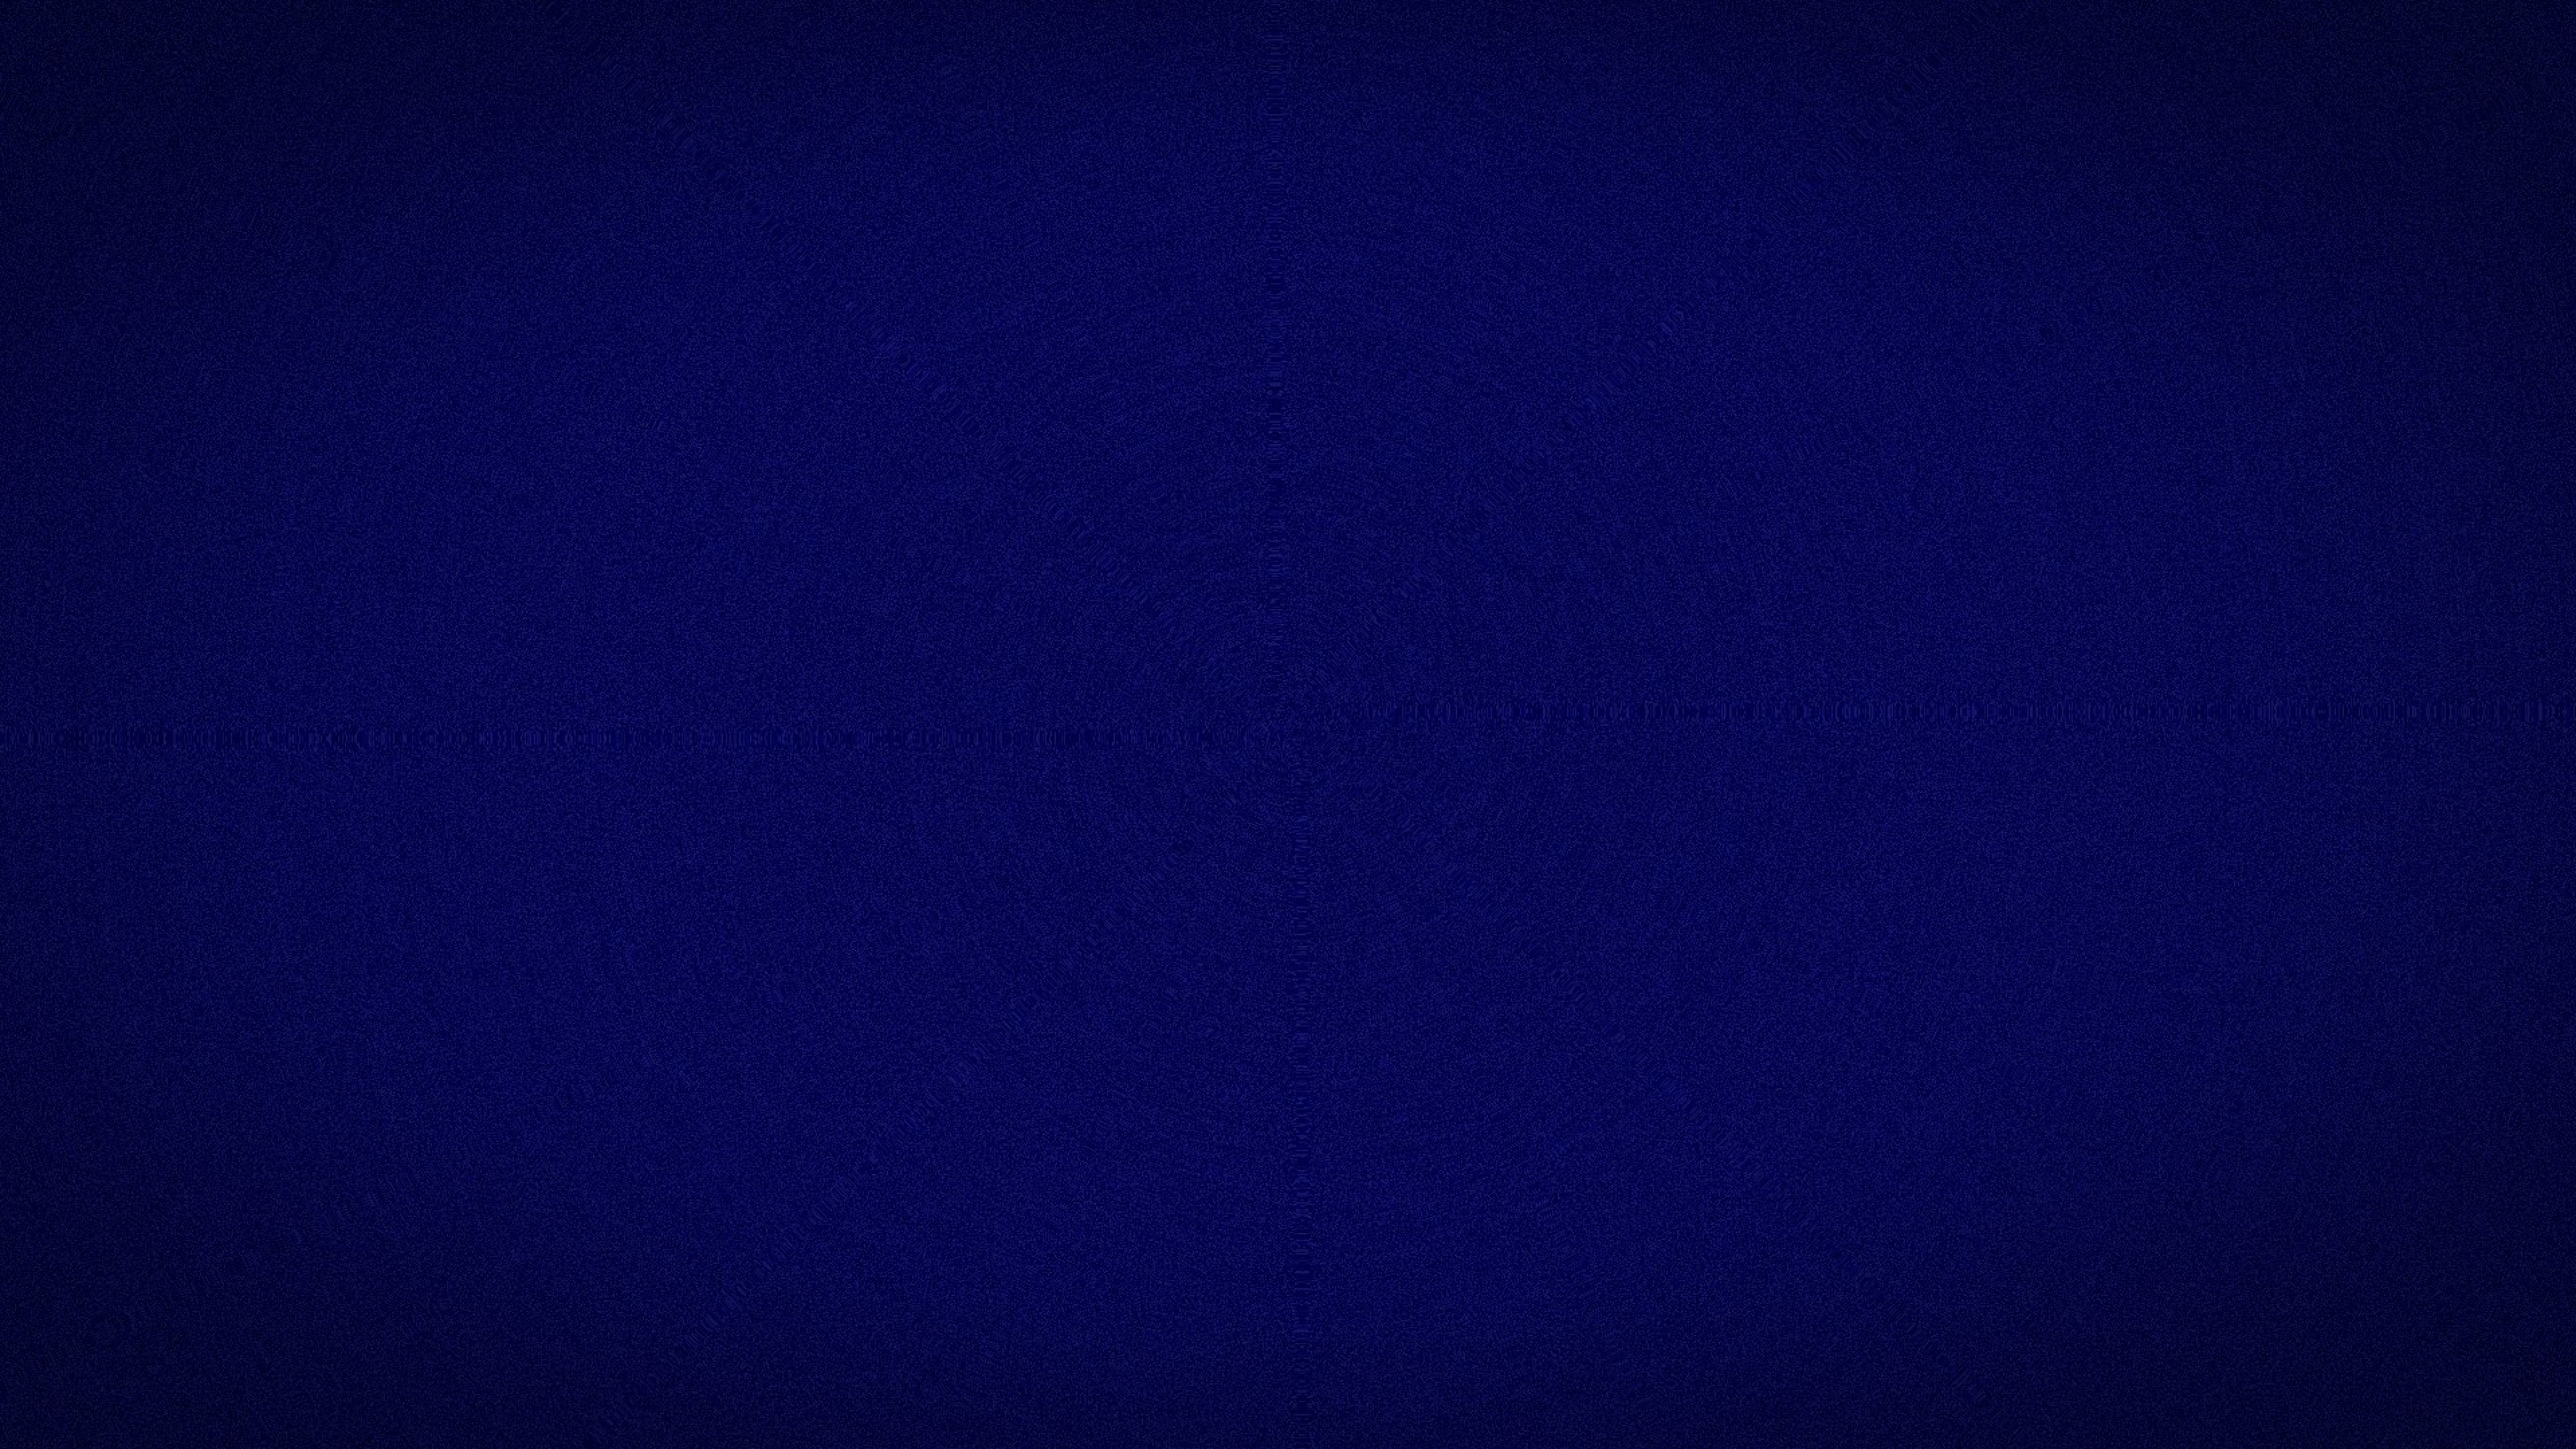 Image Gallery Navy Blue Solid Background